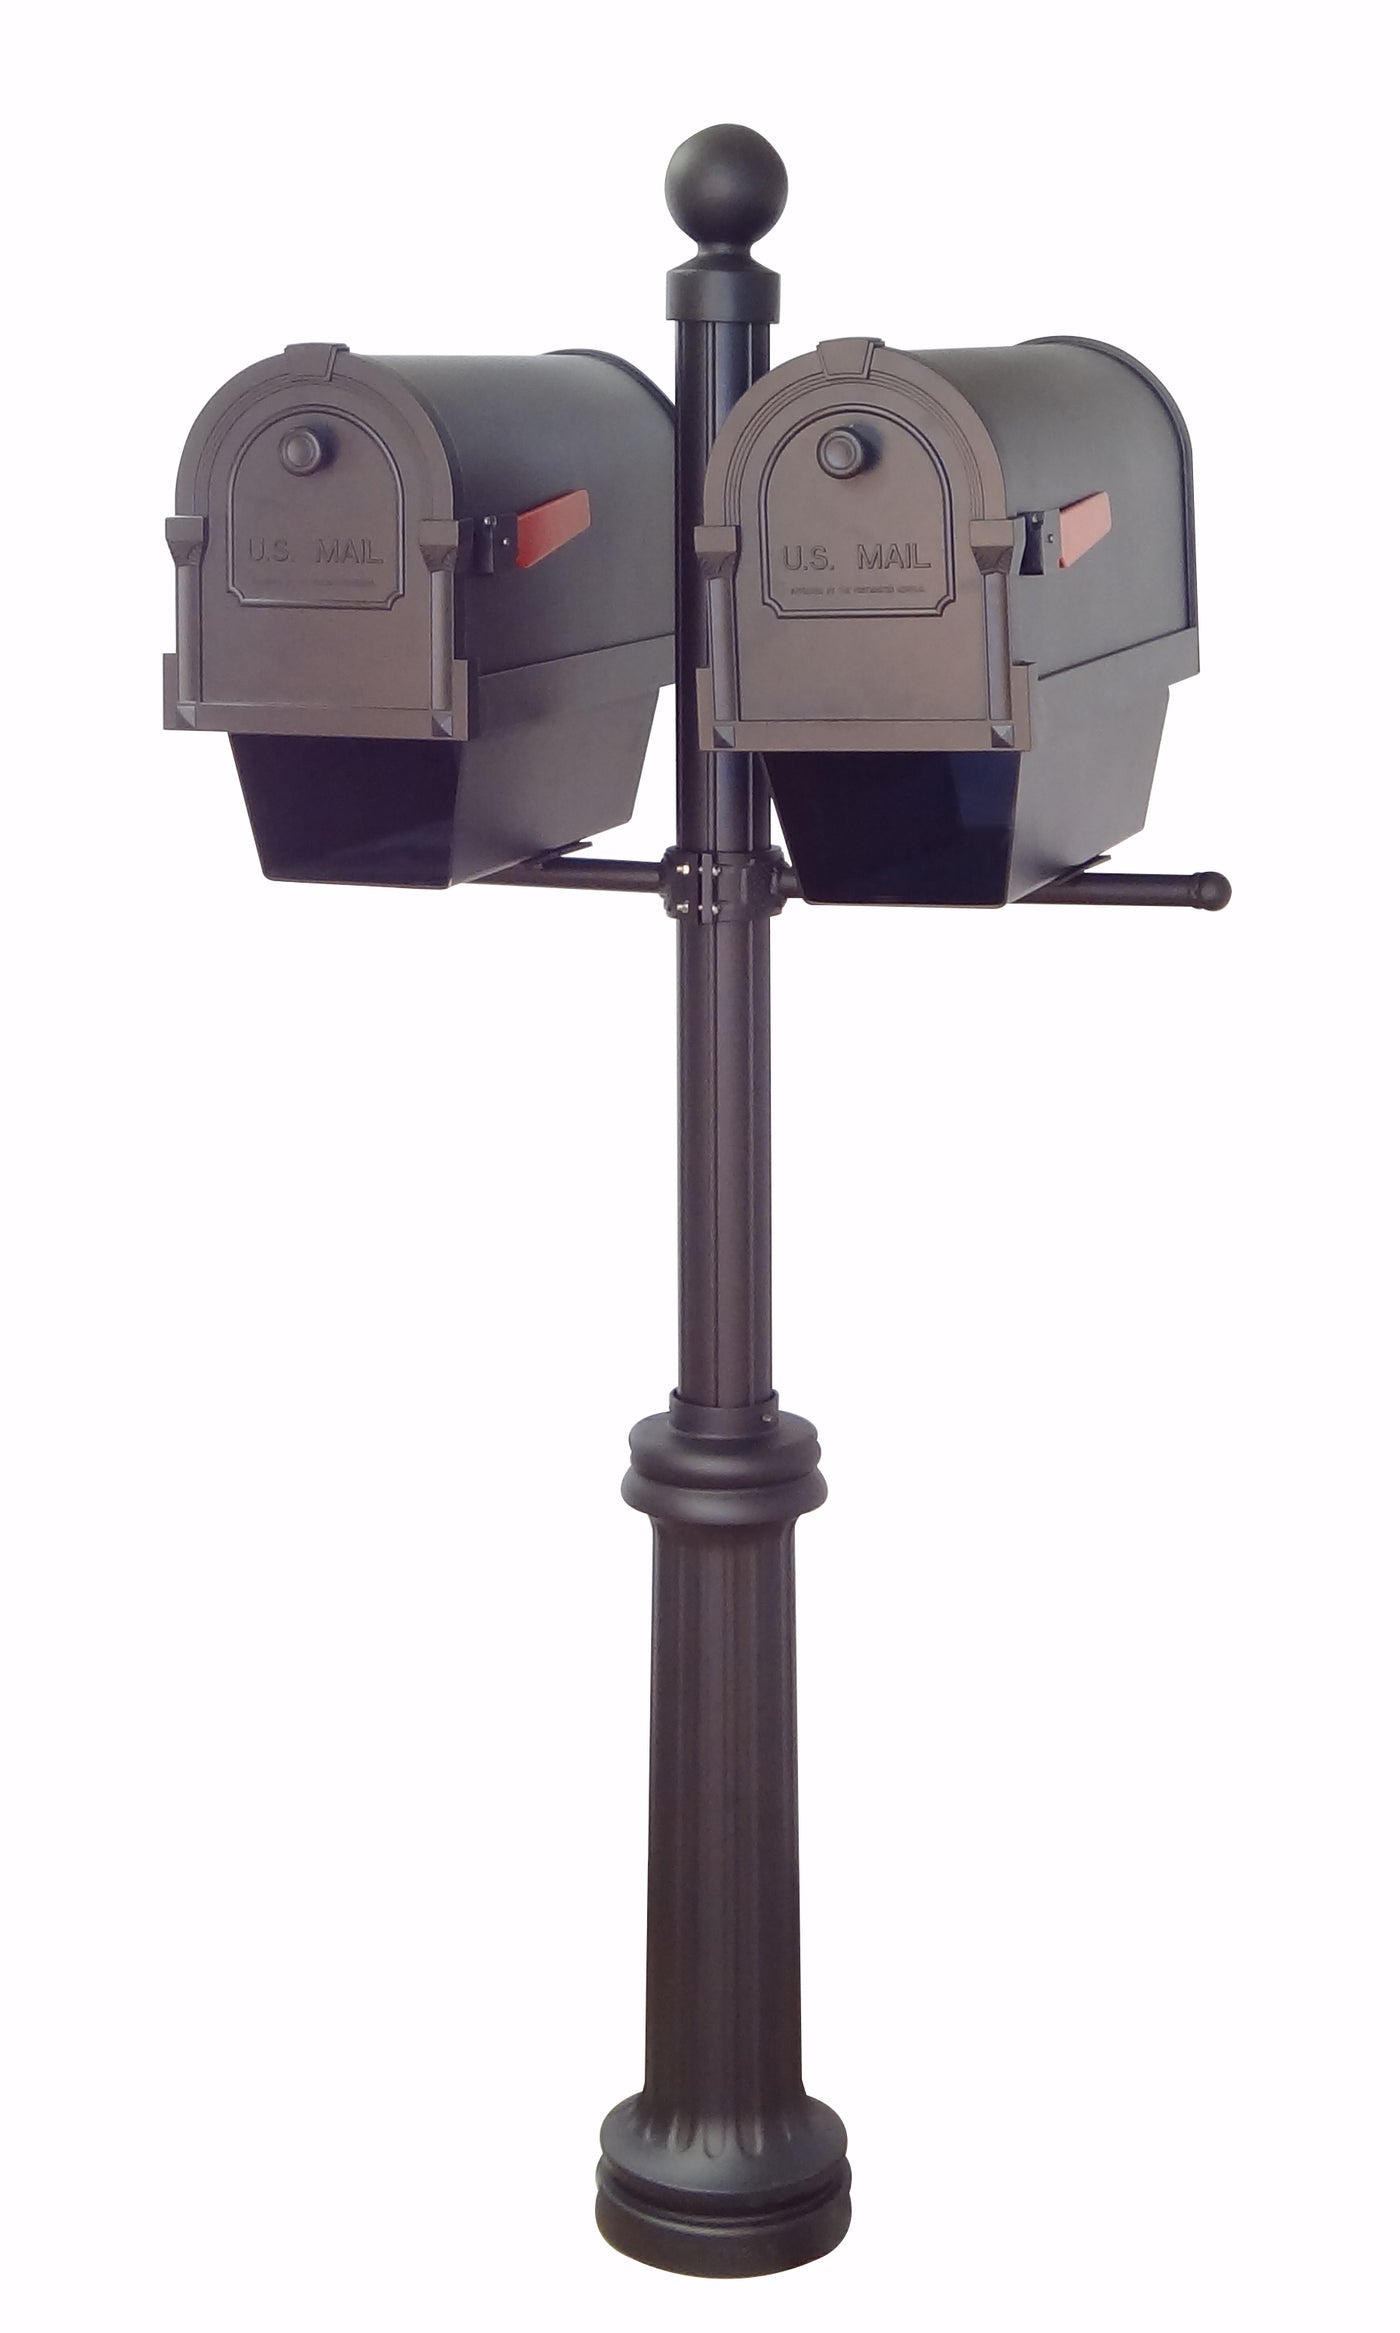 Savannah Curbside Mailboxes with Newspaper Tubes and Fresno Double Mount Mailbox Post